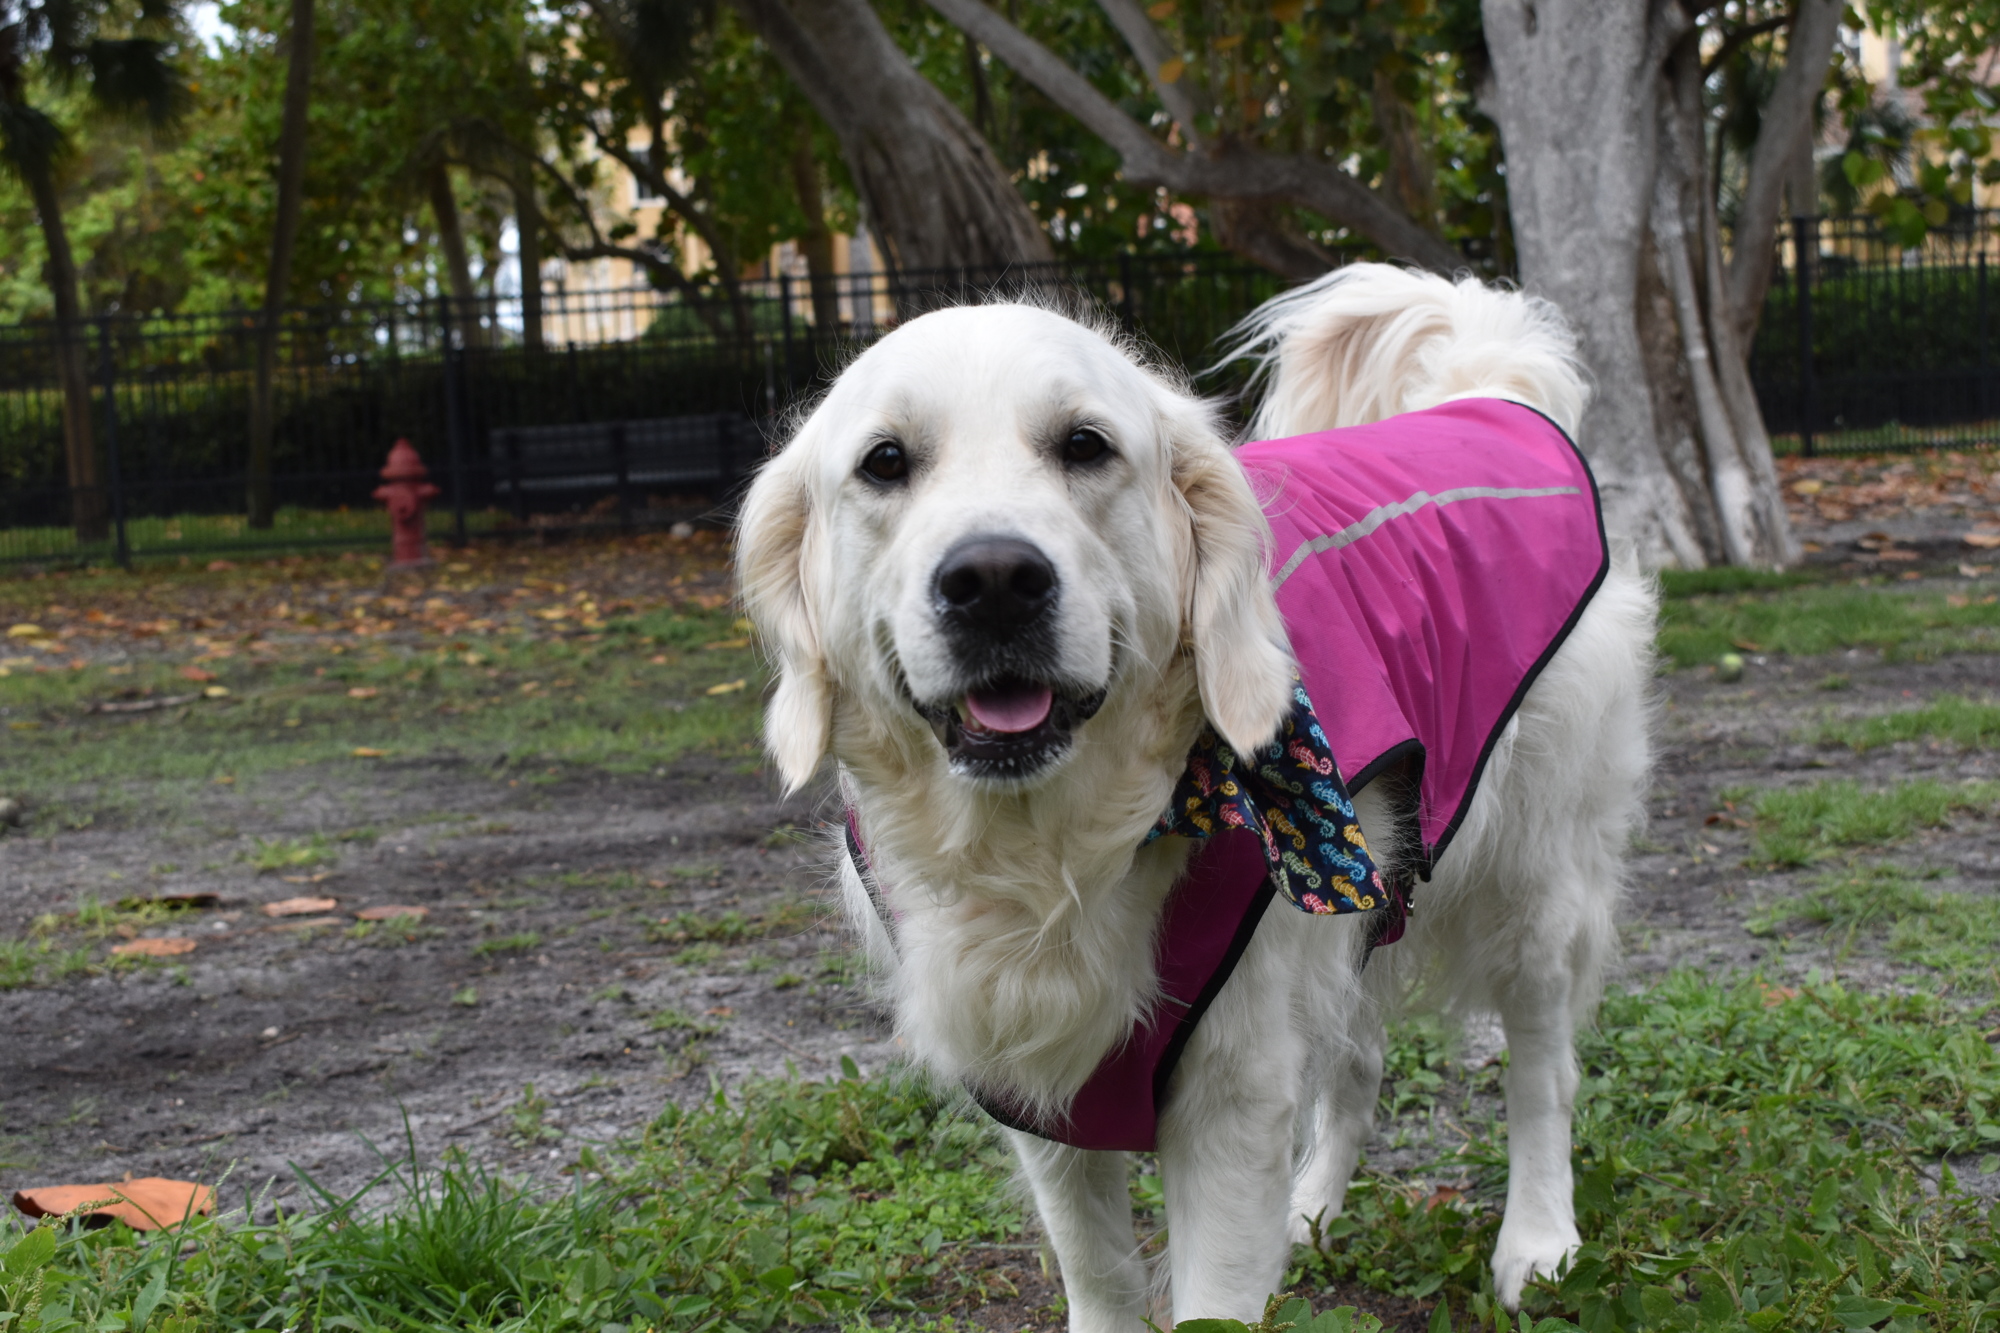 The dog named Farrah Fawcett wears a pink jacket while at the Bayfront Park dog park.